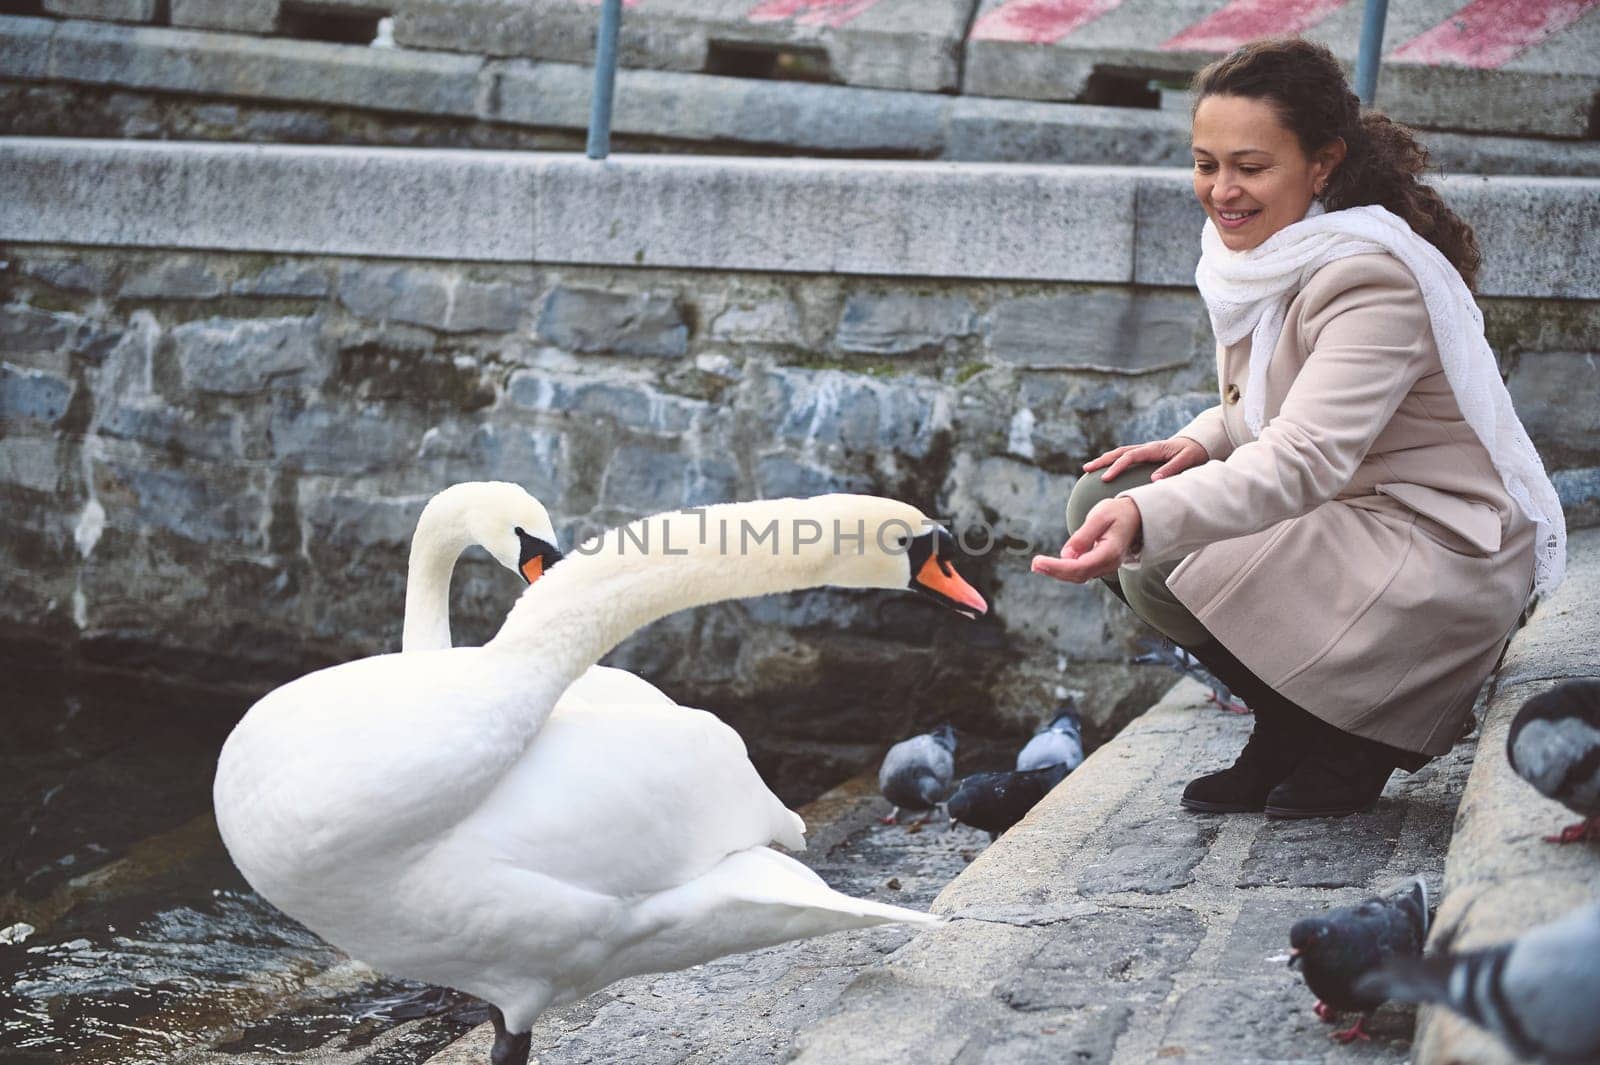 Woman in a coat and scarf feeding swans and pigeons on a stone path by the water. A peaceful and interactive moment with nature.